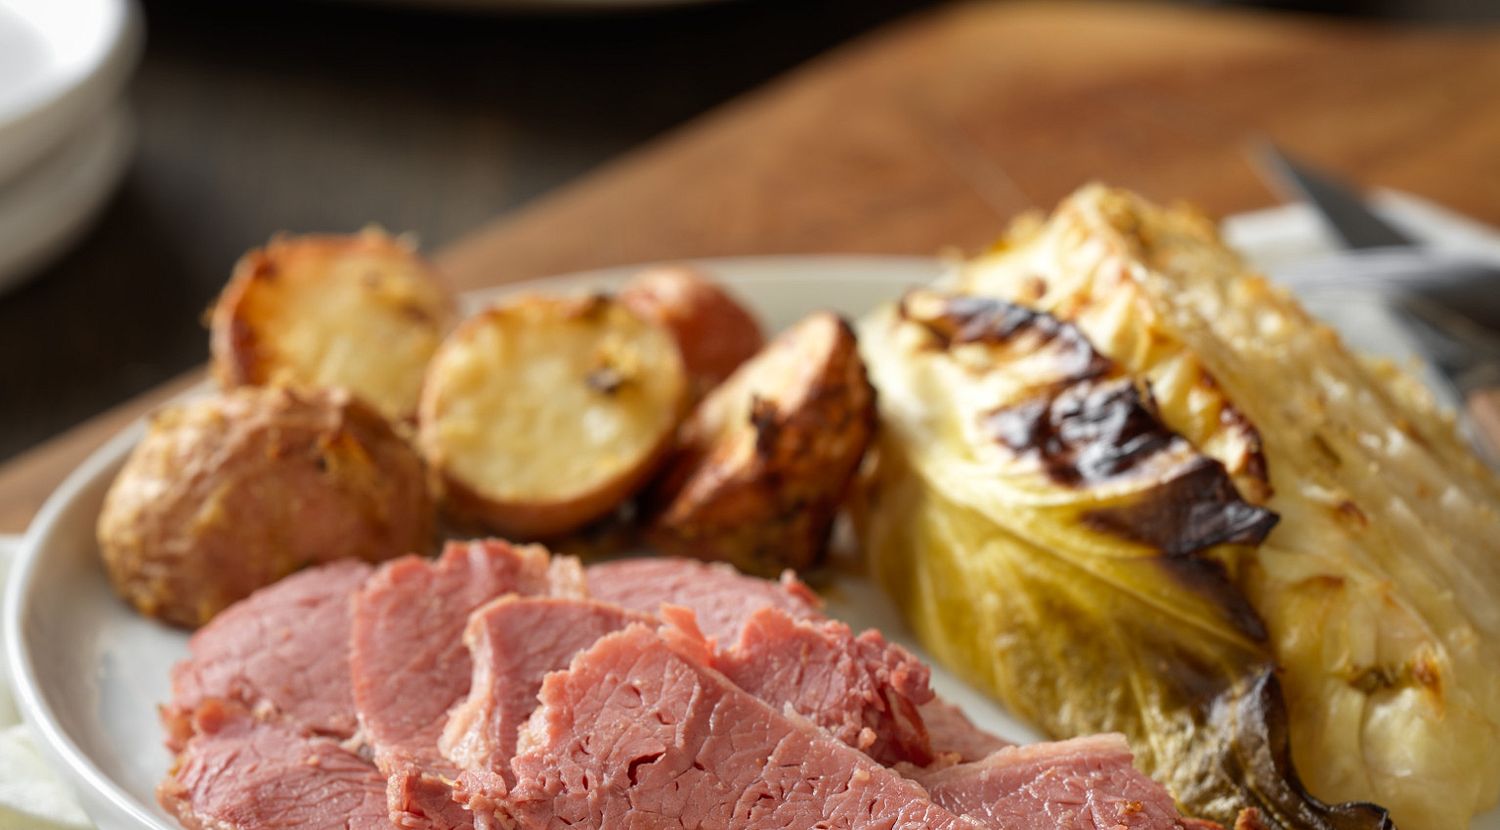 Dijon-Glazed Corned Beef with Savory Cabbage and Red Potatoes